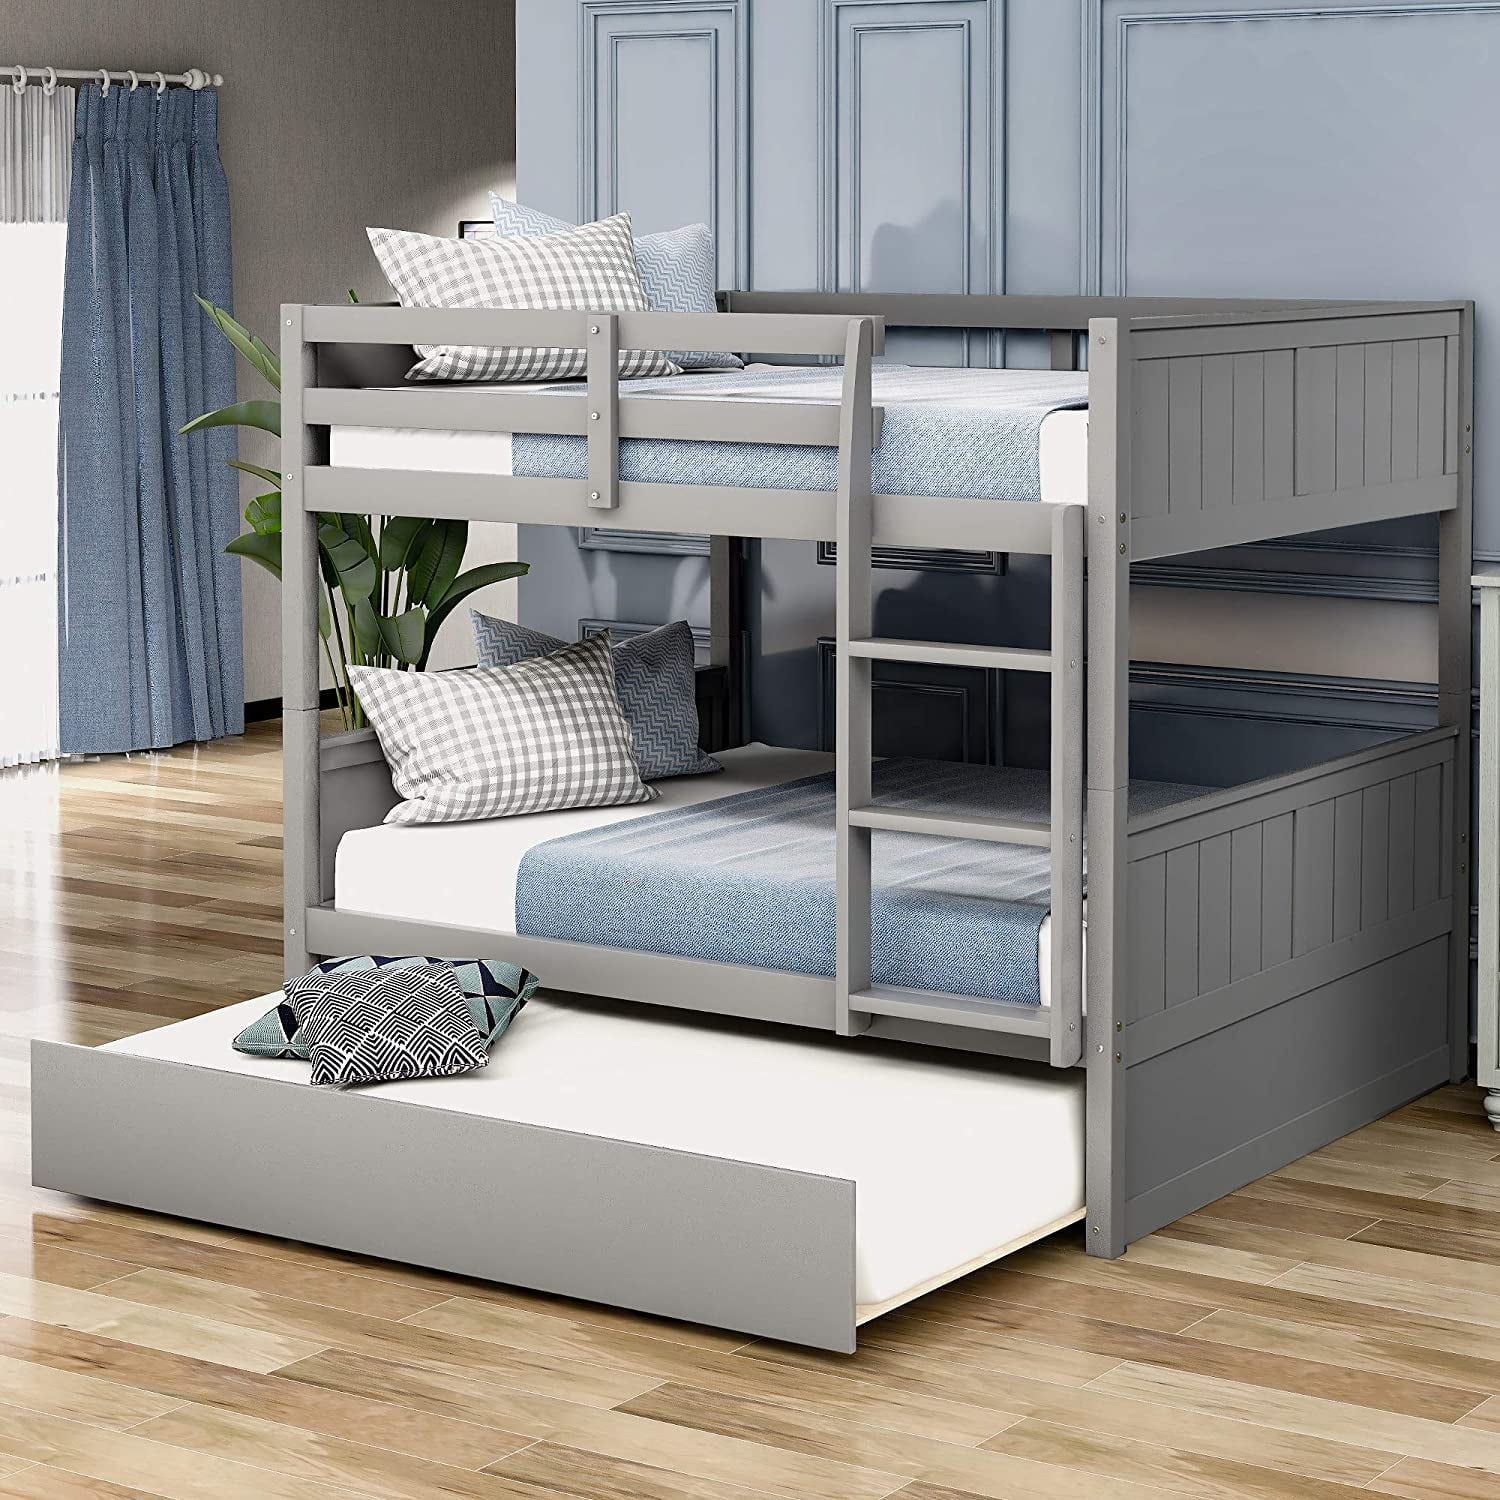 Soges Full Over Bunk Bed With Twin, Bunk Bed With Pull Out Bed